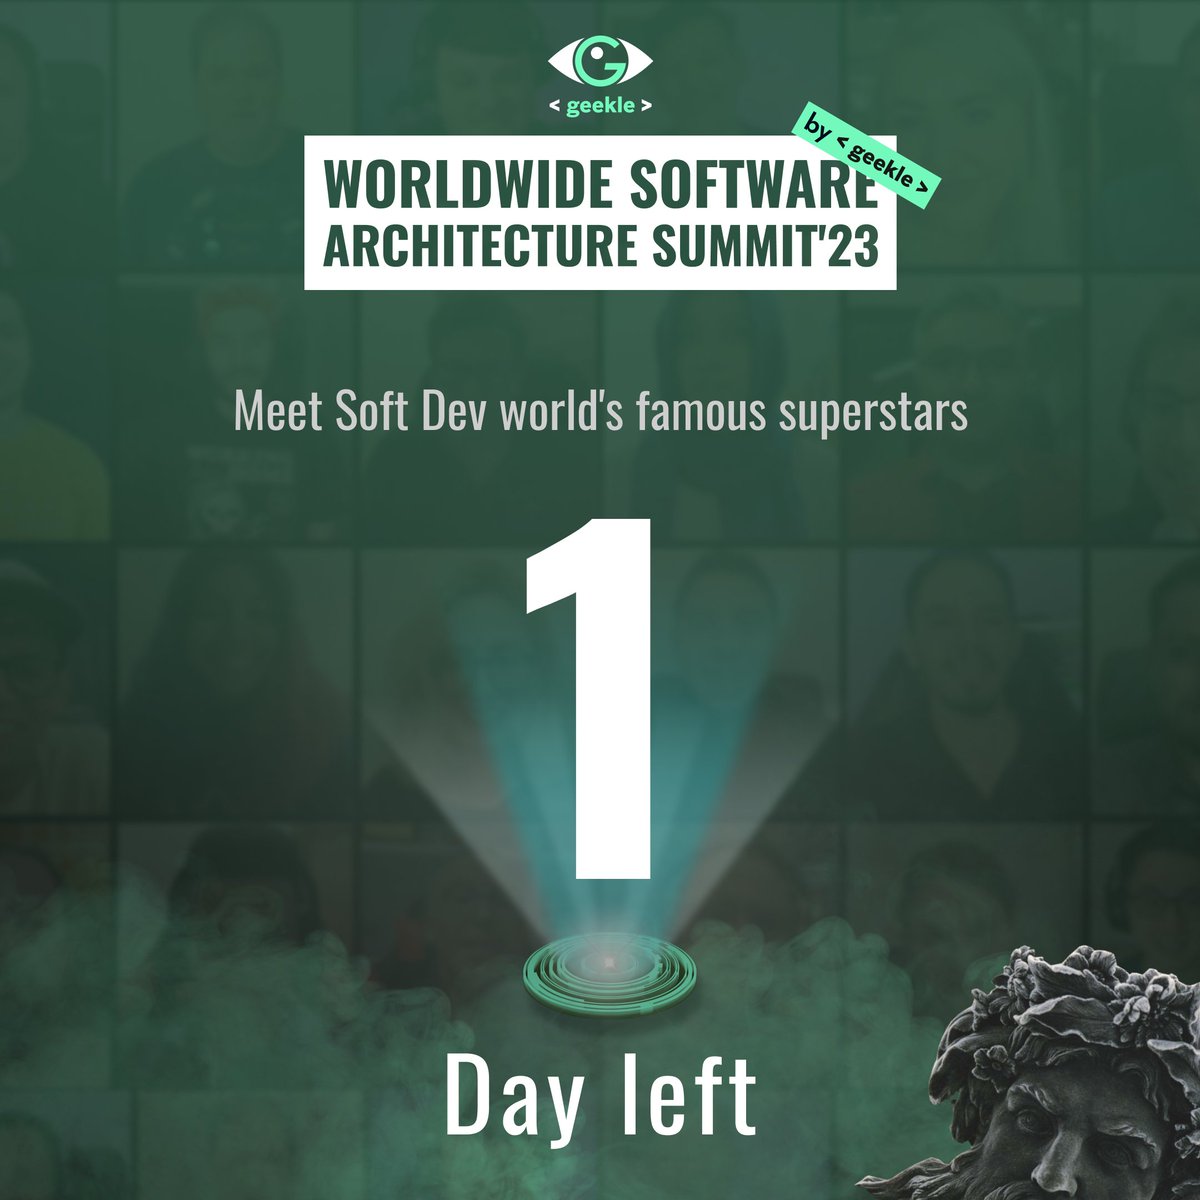 WE ARE GOING LIVE IN 1 DAY🚀 ⠀ Worldwide Software Architecture Summit'23 is almost here! ⠀ The schedule for our summit: ✨ May 16 - Junior Track Start: 09:00 - 18:10 (UTC) ✨ May 17 - Senior Track Start: 09:00 - 19:00 (UTC) Buy your ticket at events.geekle.us/wsas23/